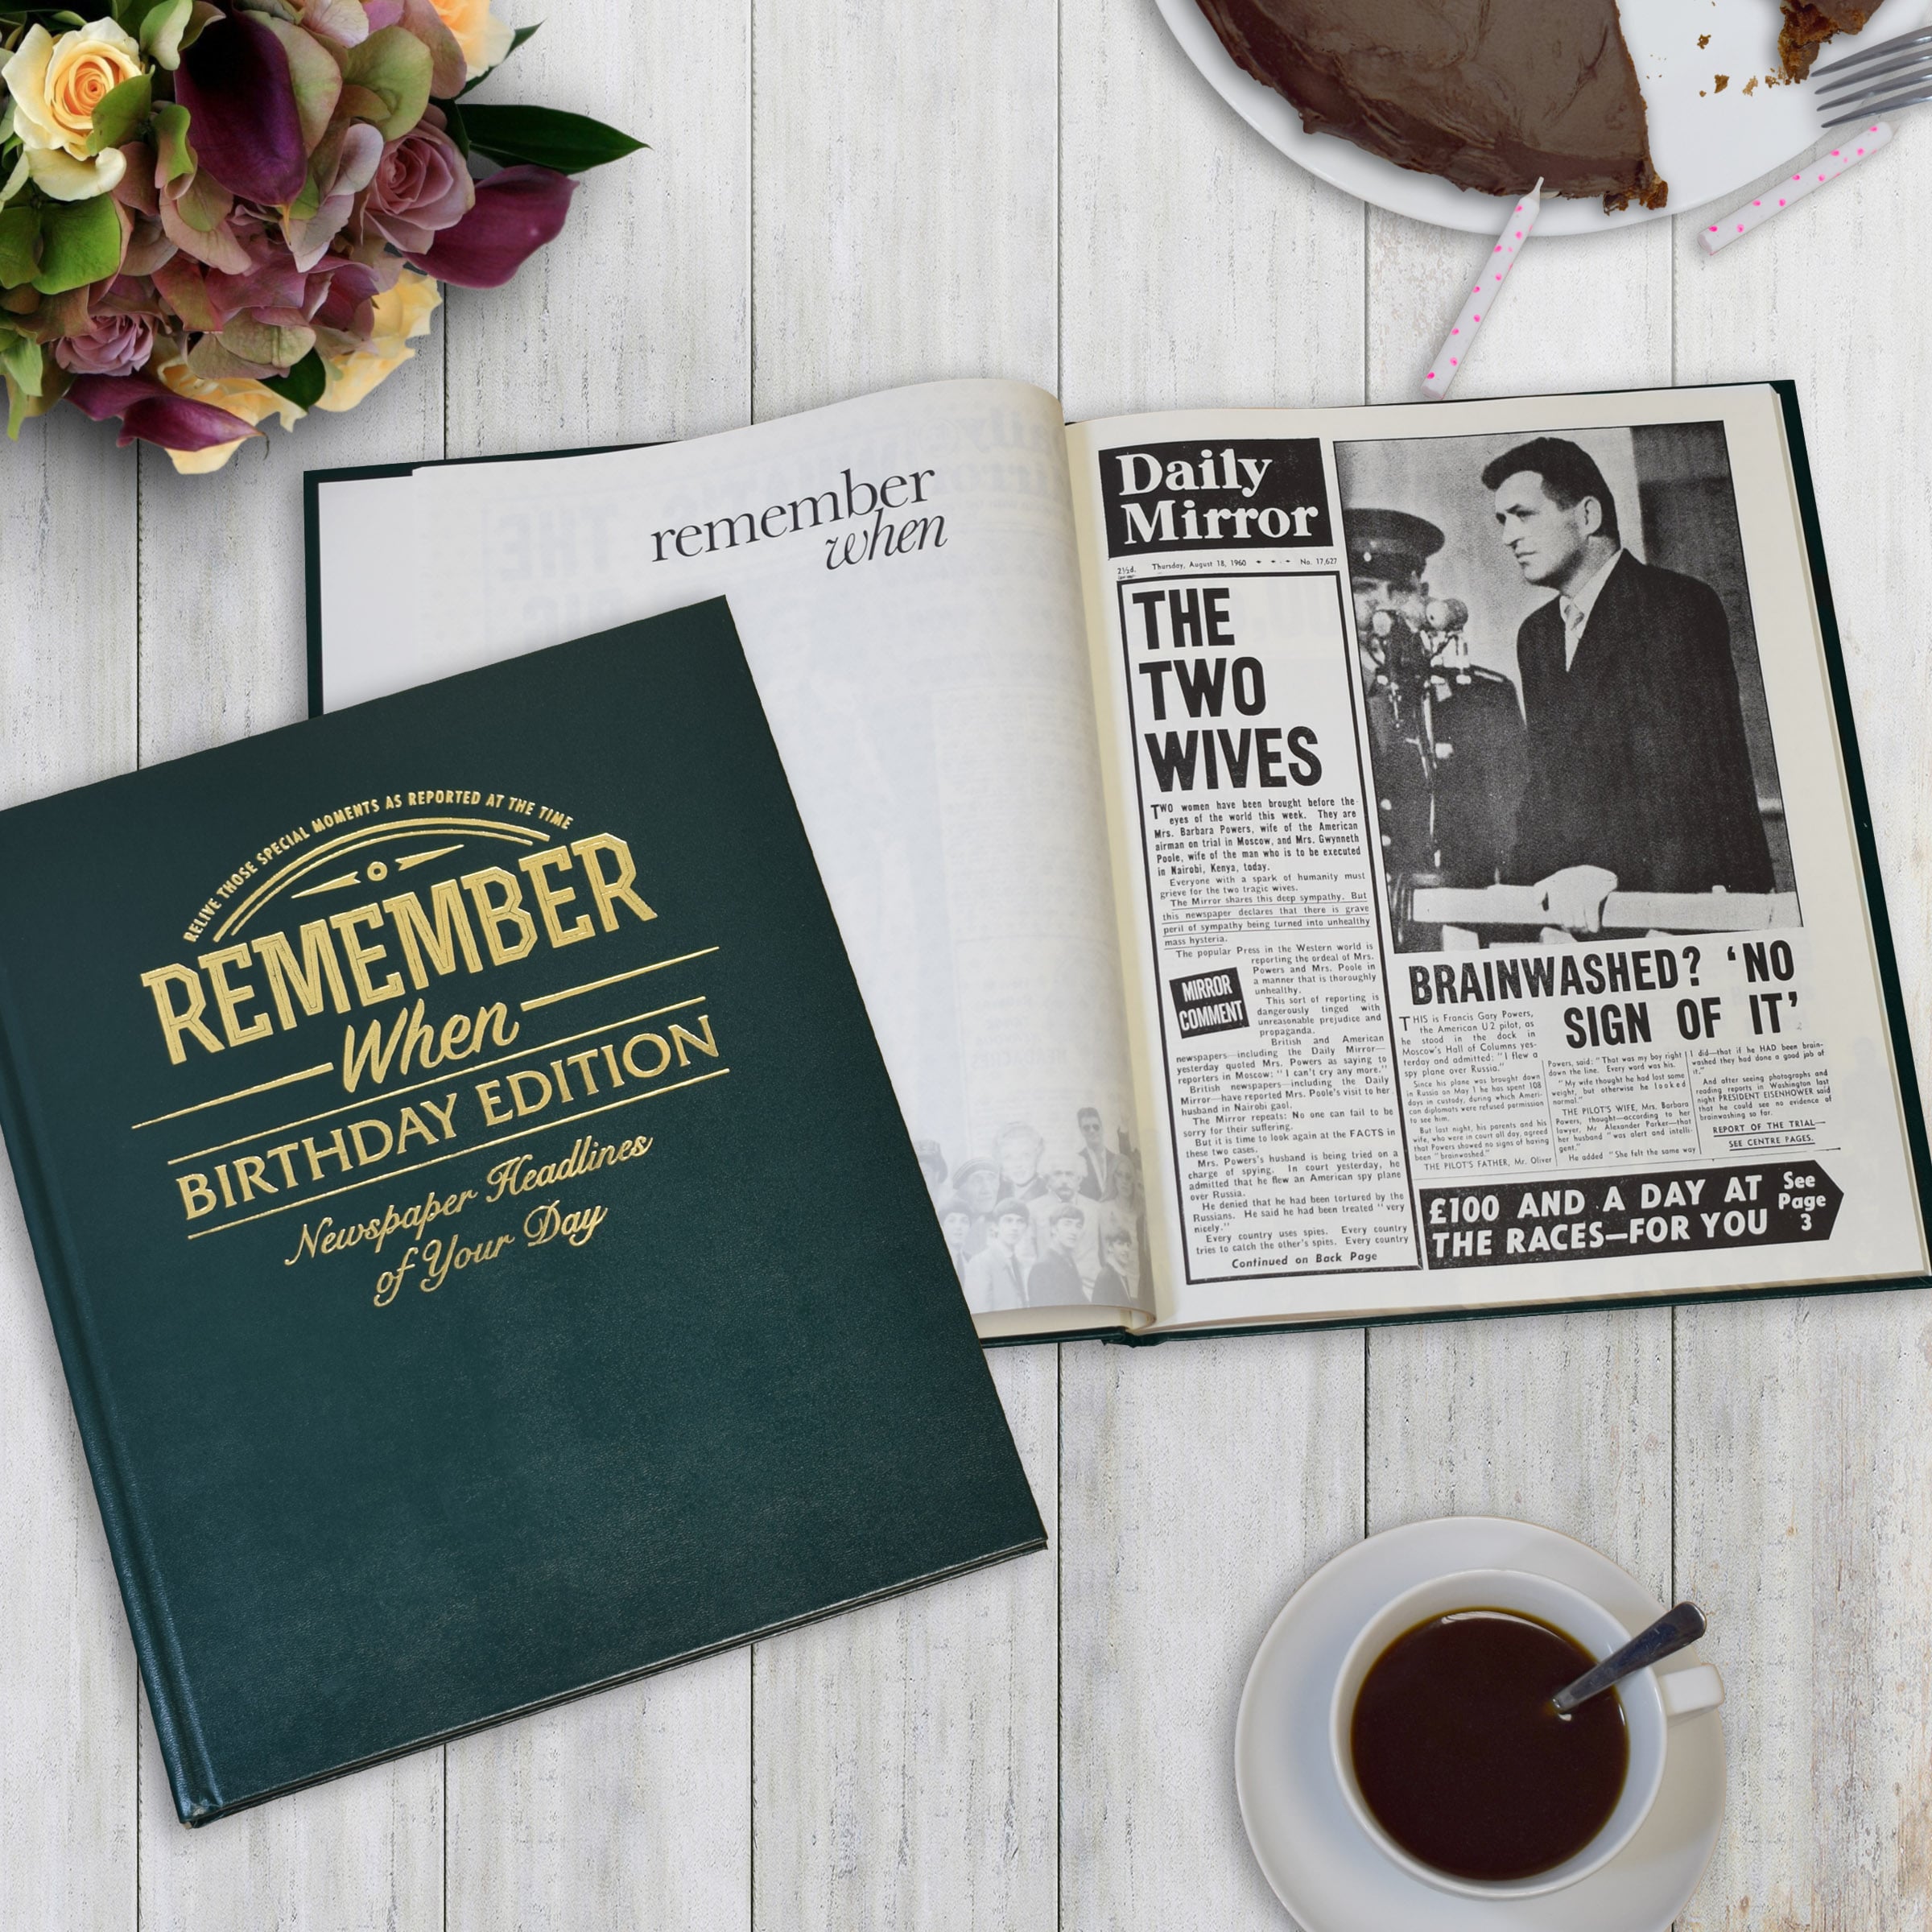 personalized Birthday Edition News book